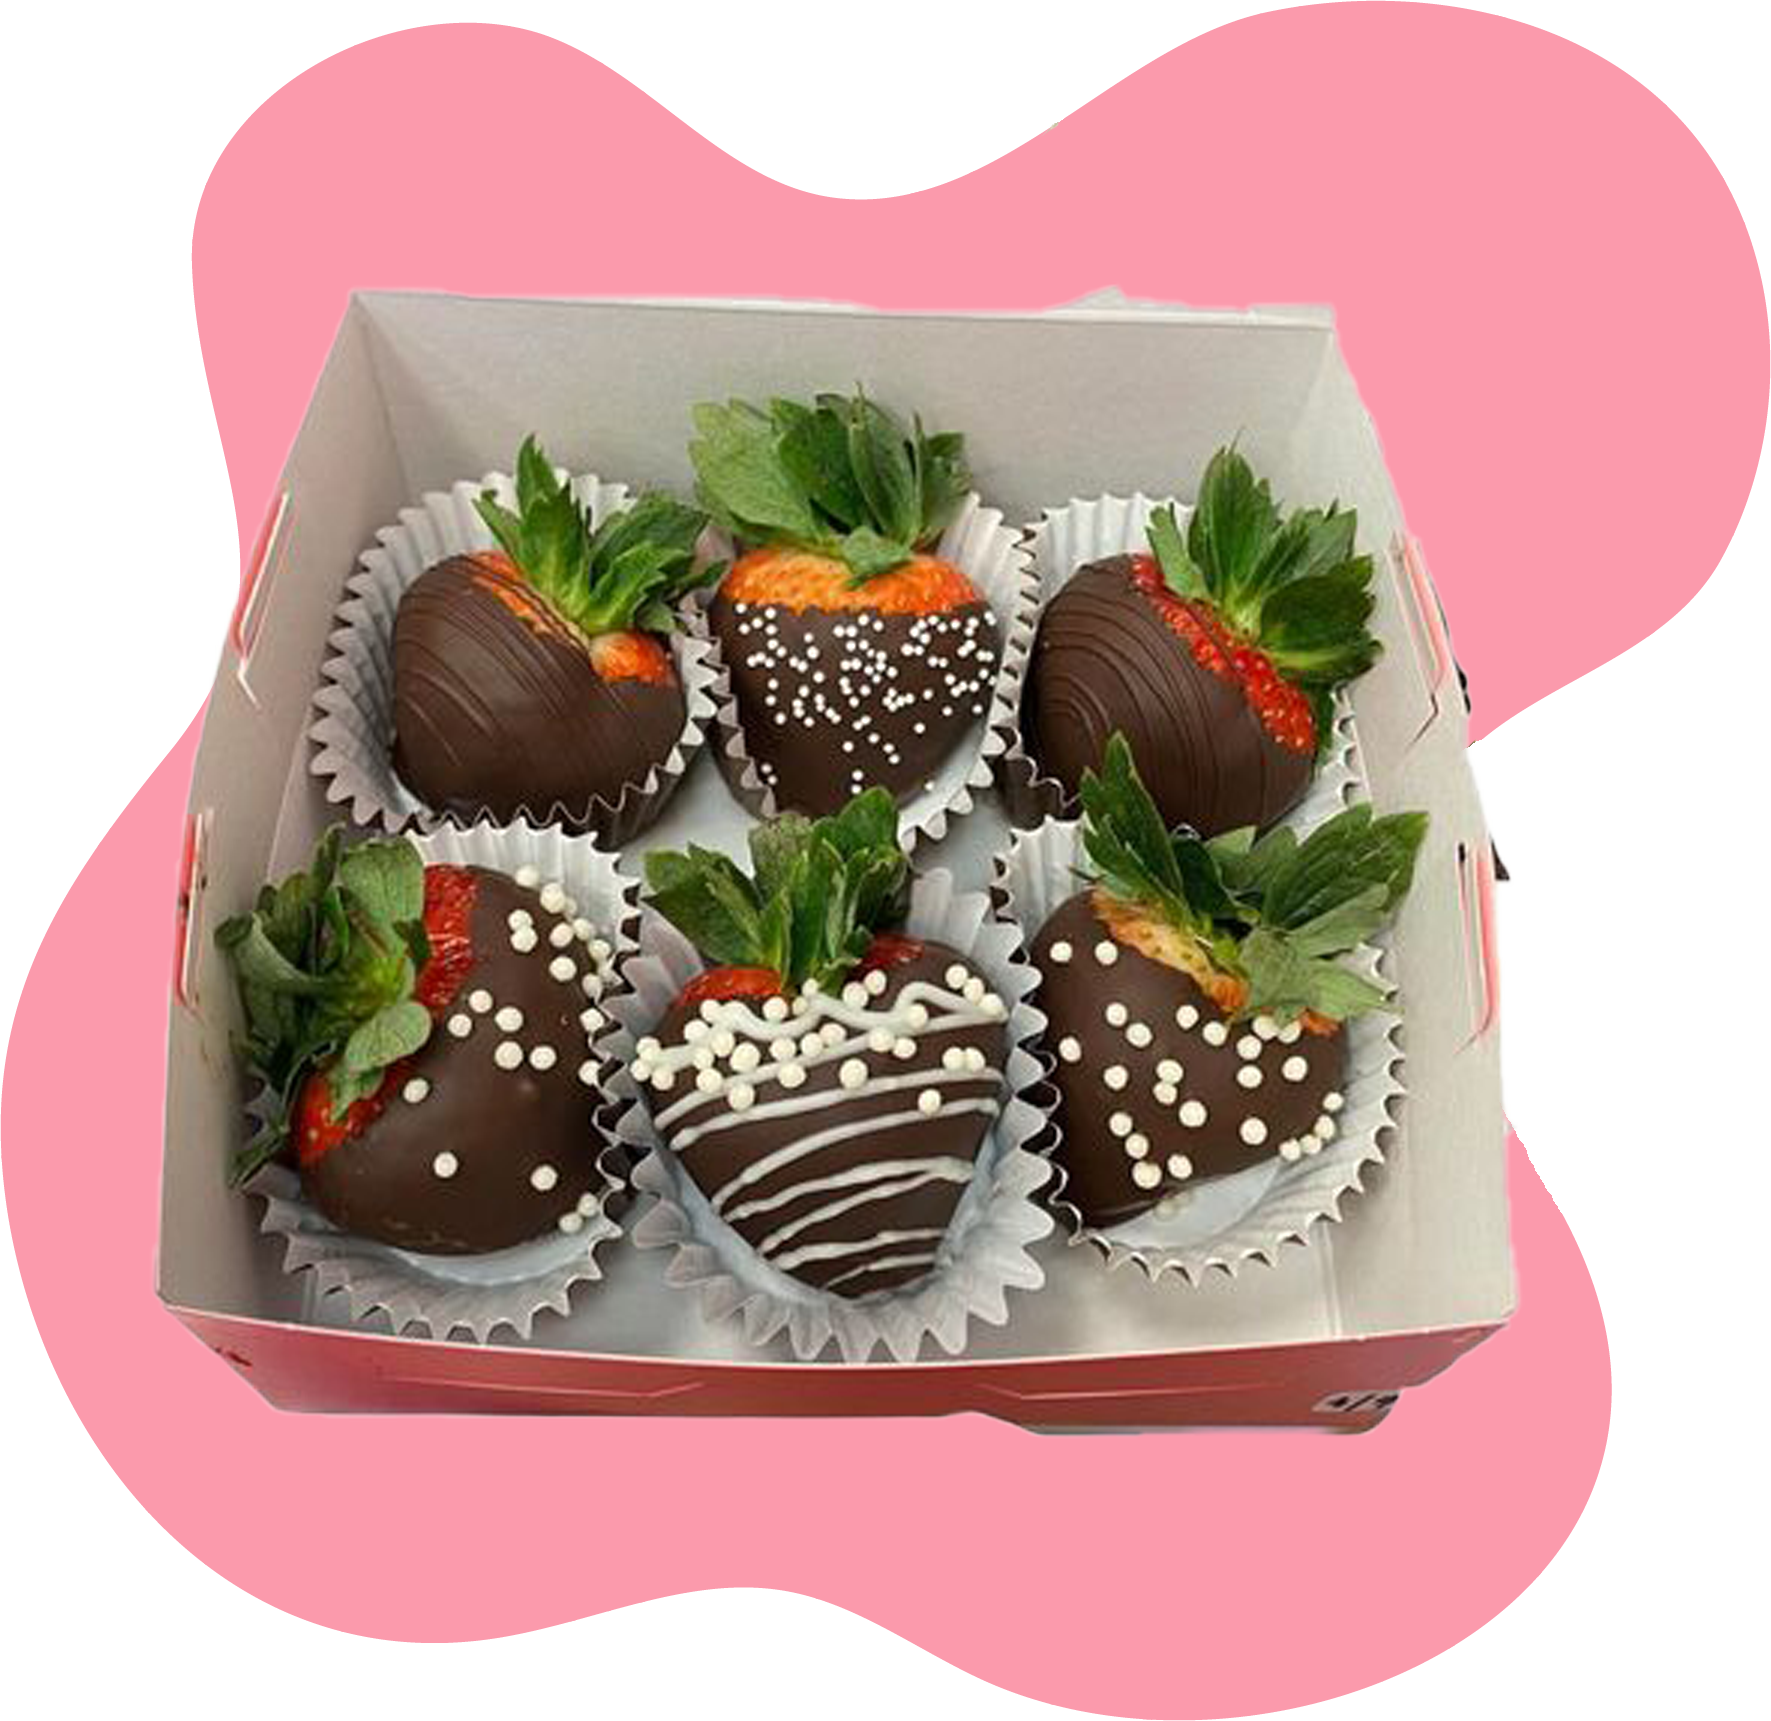 A box of chocolate covered strawberries with sprinkles on them